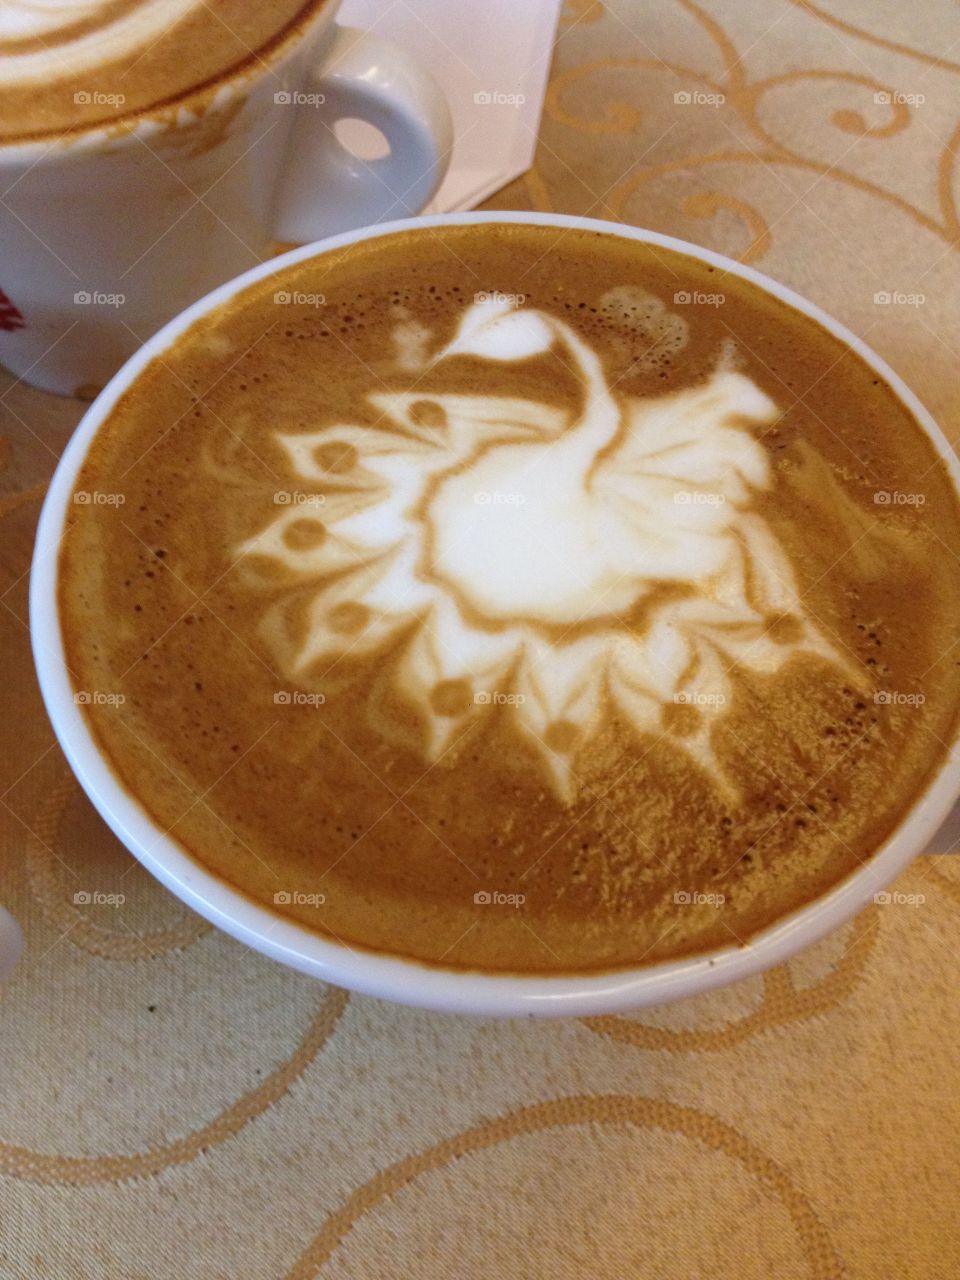 Swan. Coffee art during competition